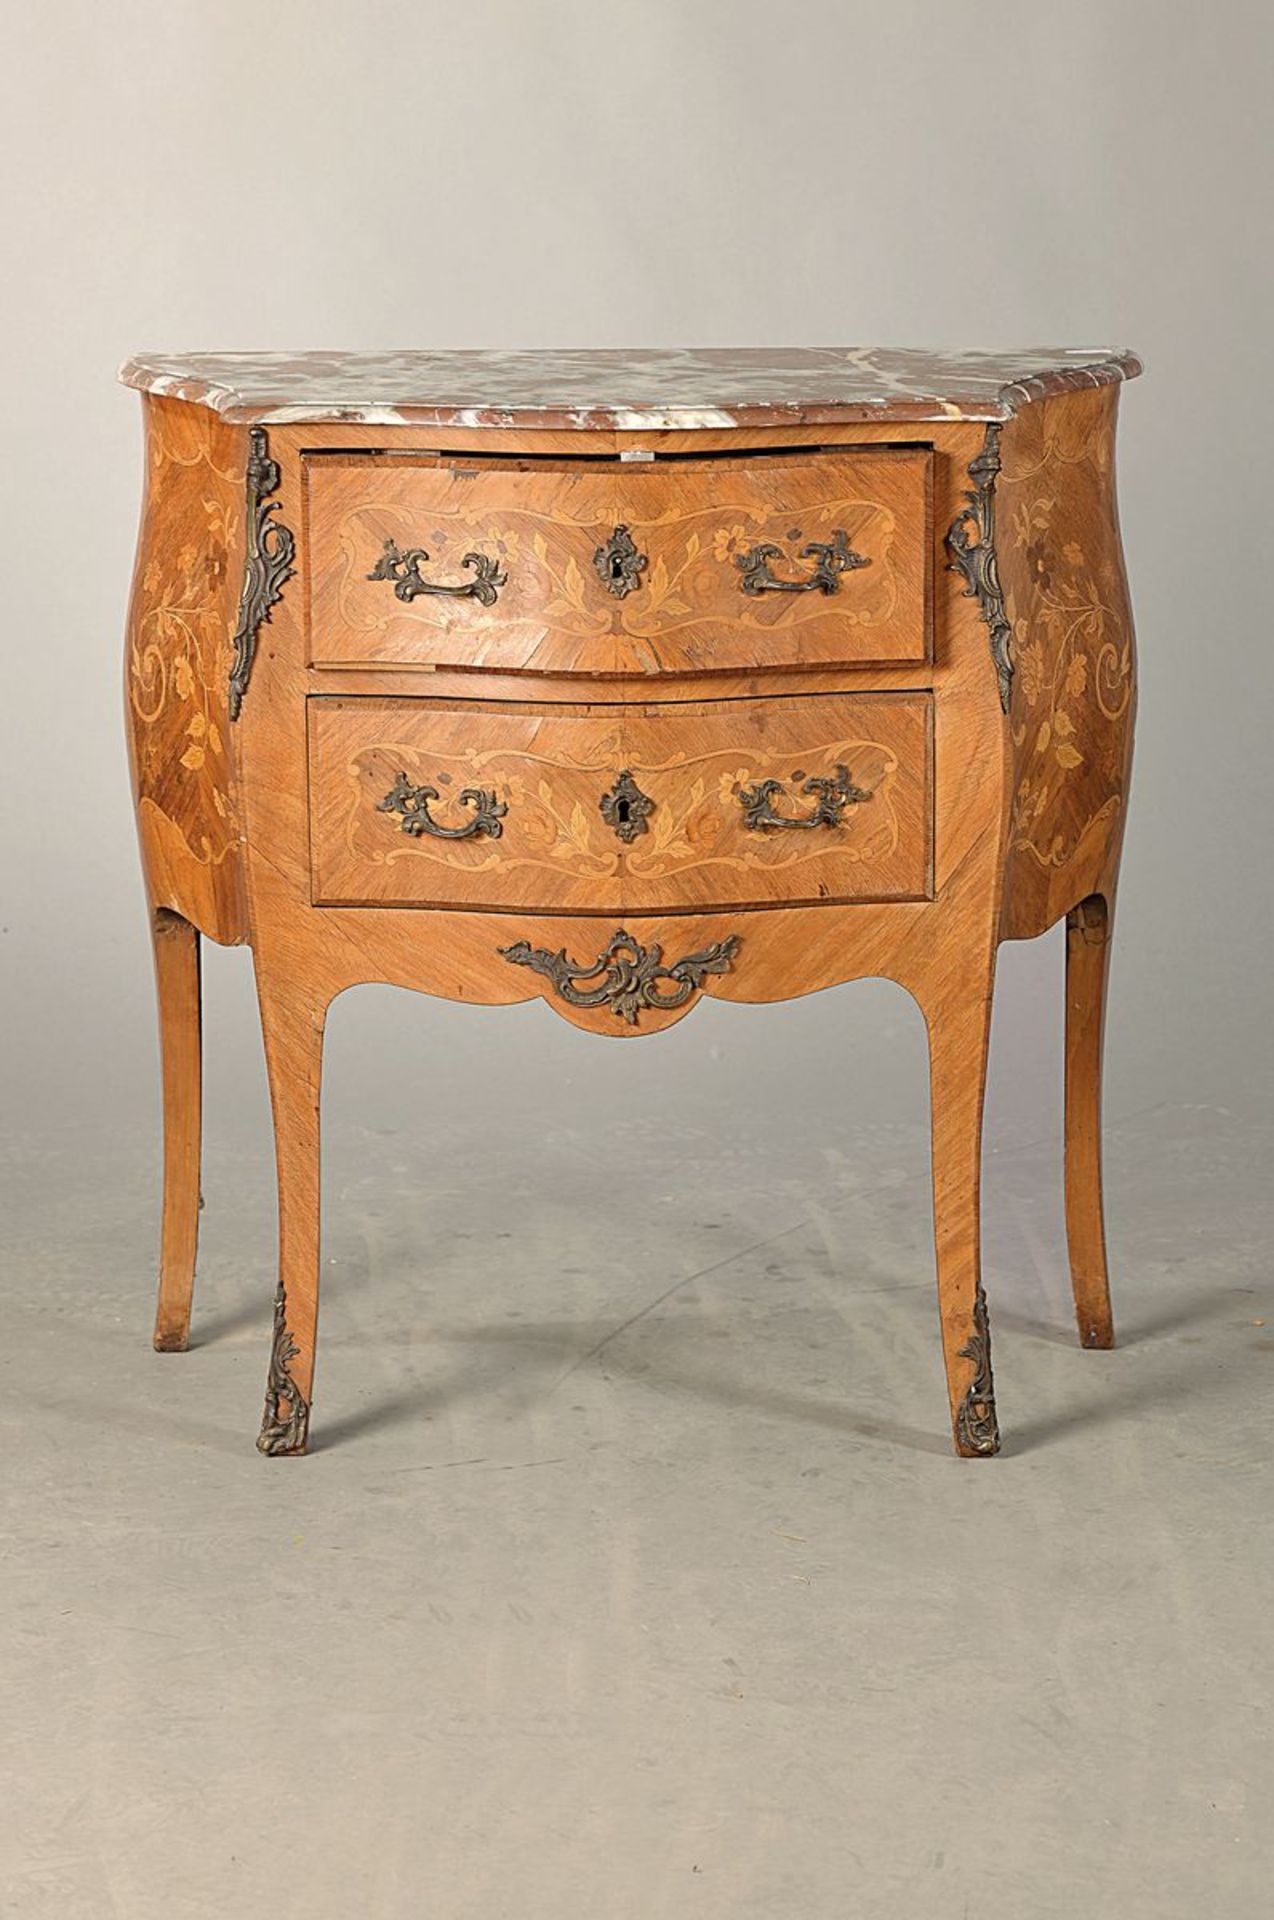 chest of drawers, Italy, around 1900/10, afterancient model, corpus hardwood, slightly arched shape,